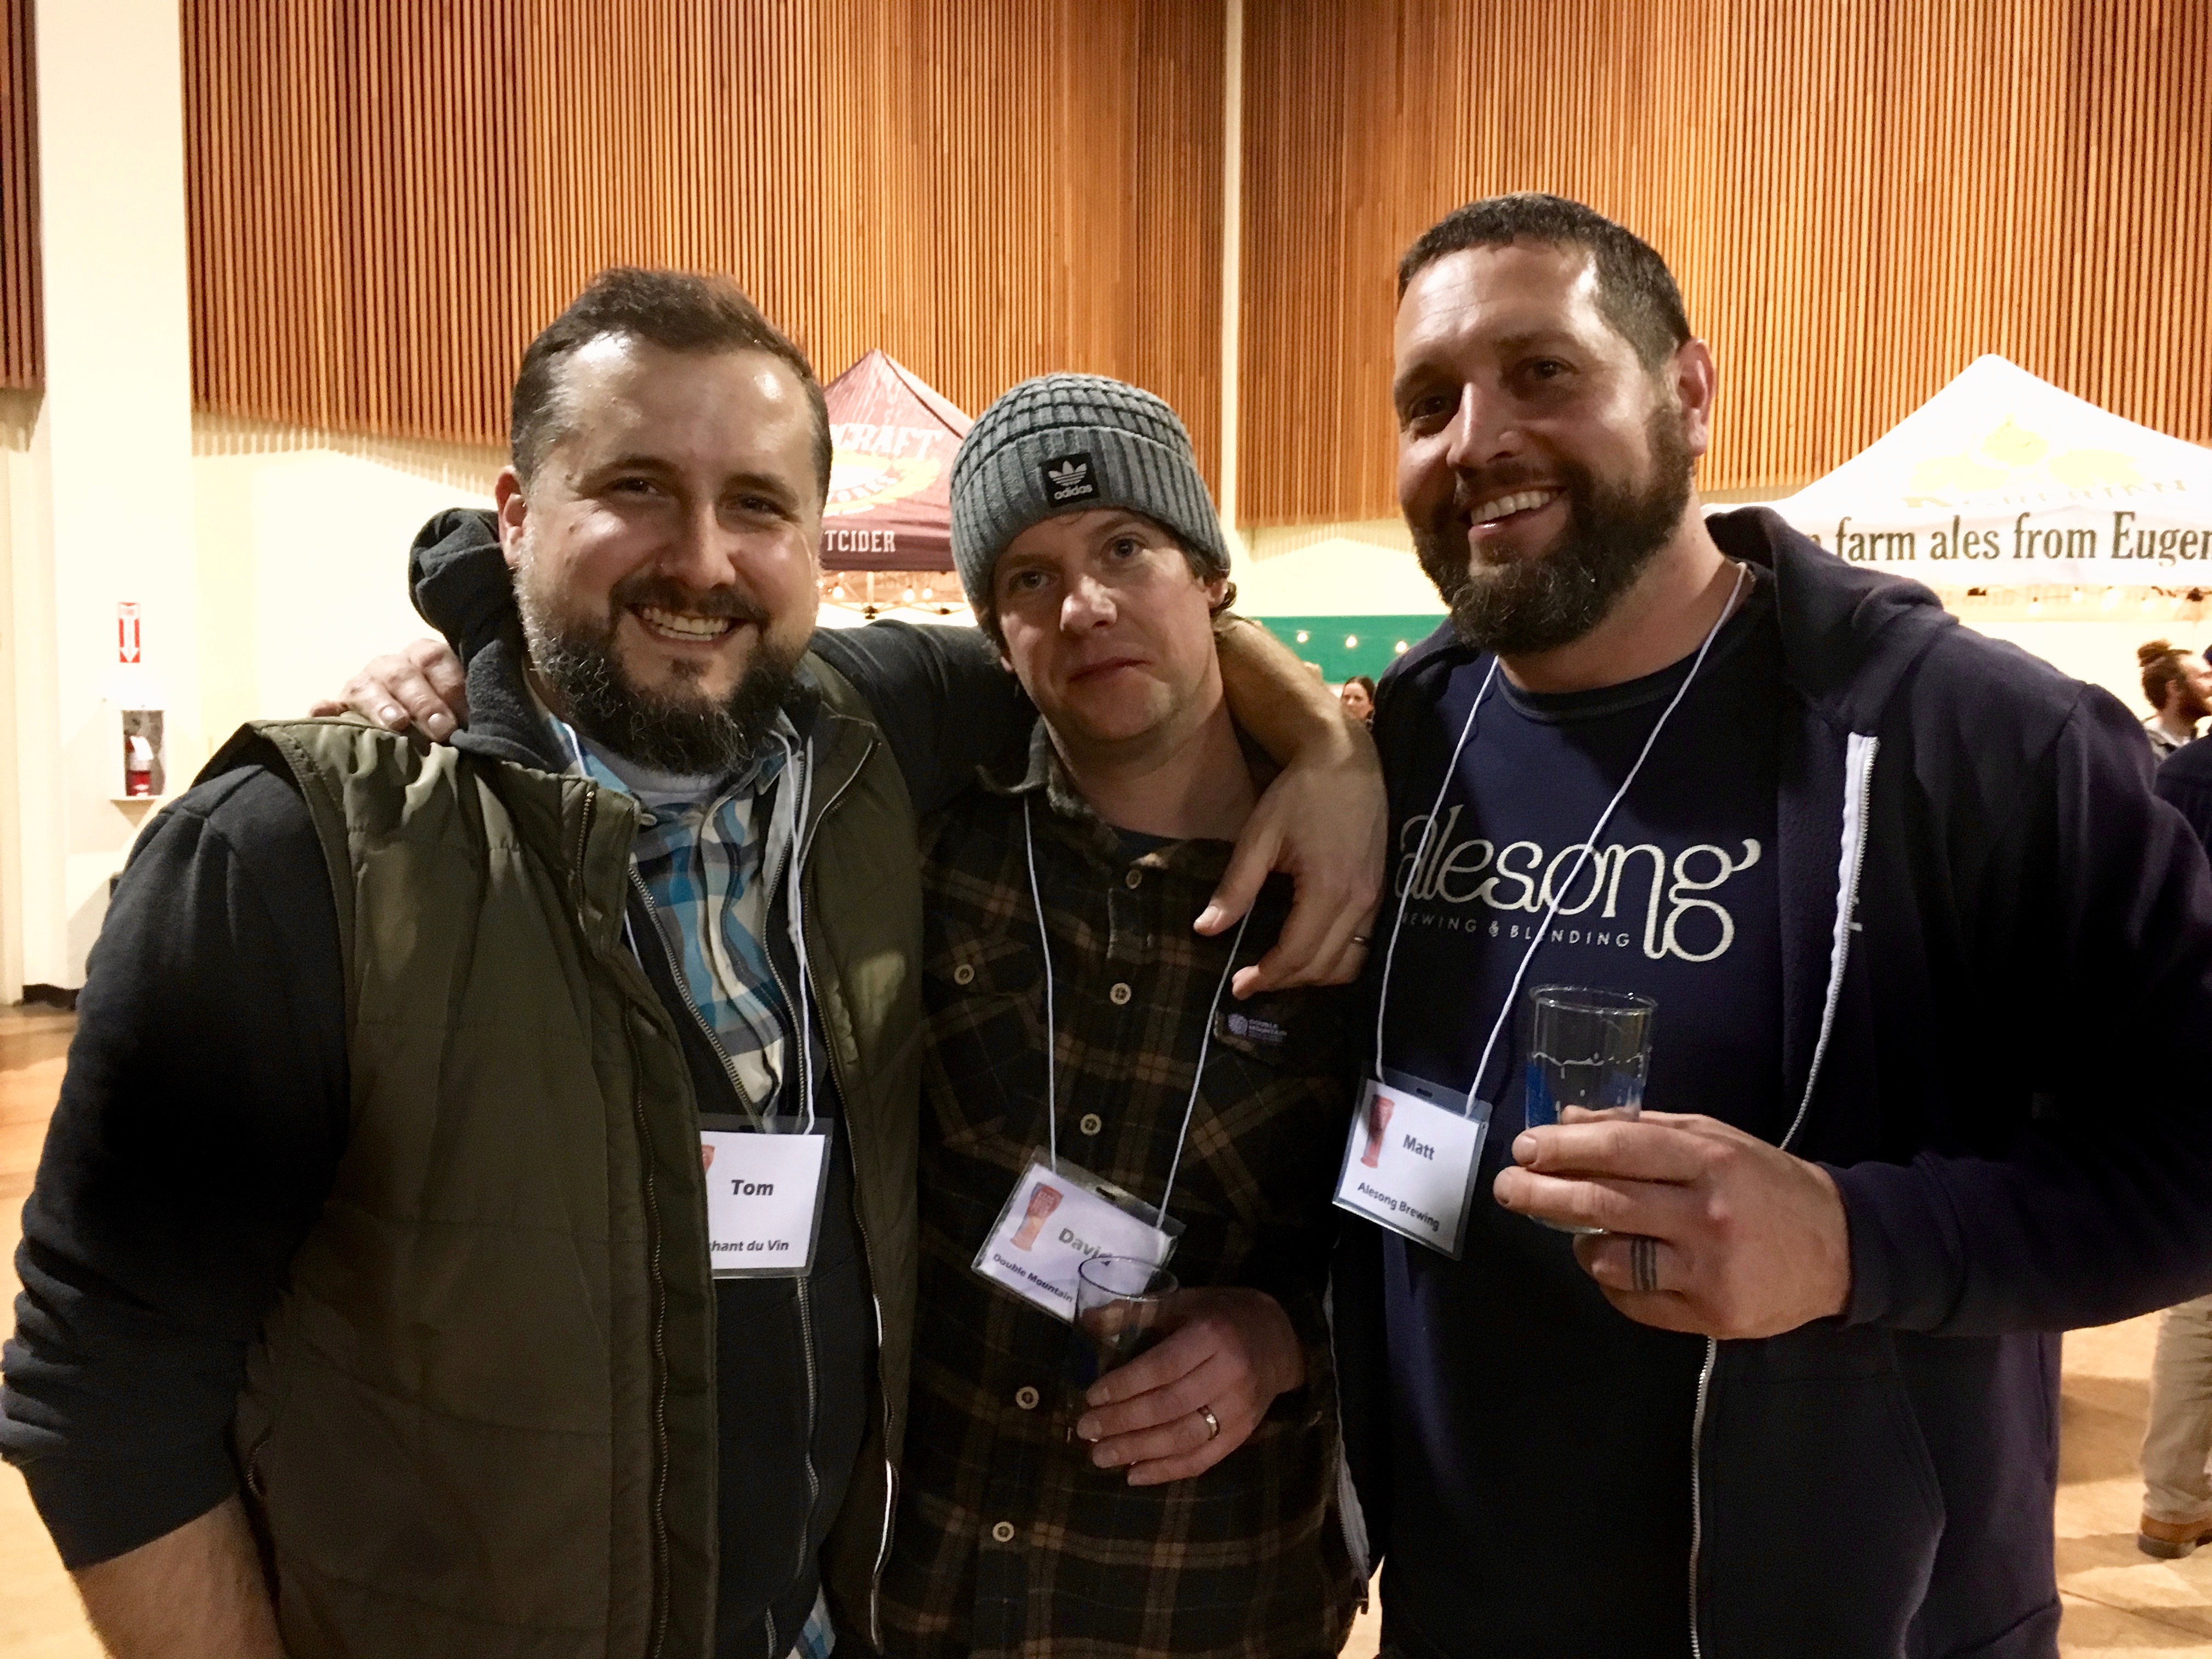 Tom Bowers formerly of Merchant du Vin, David Alan from Double Mountain Brewery and Matt Van Wyk from Alesong Brewing at the 2017 KLCC Beer Fest.